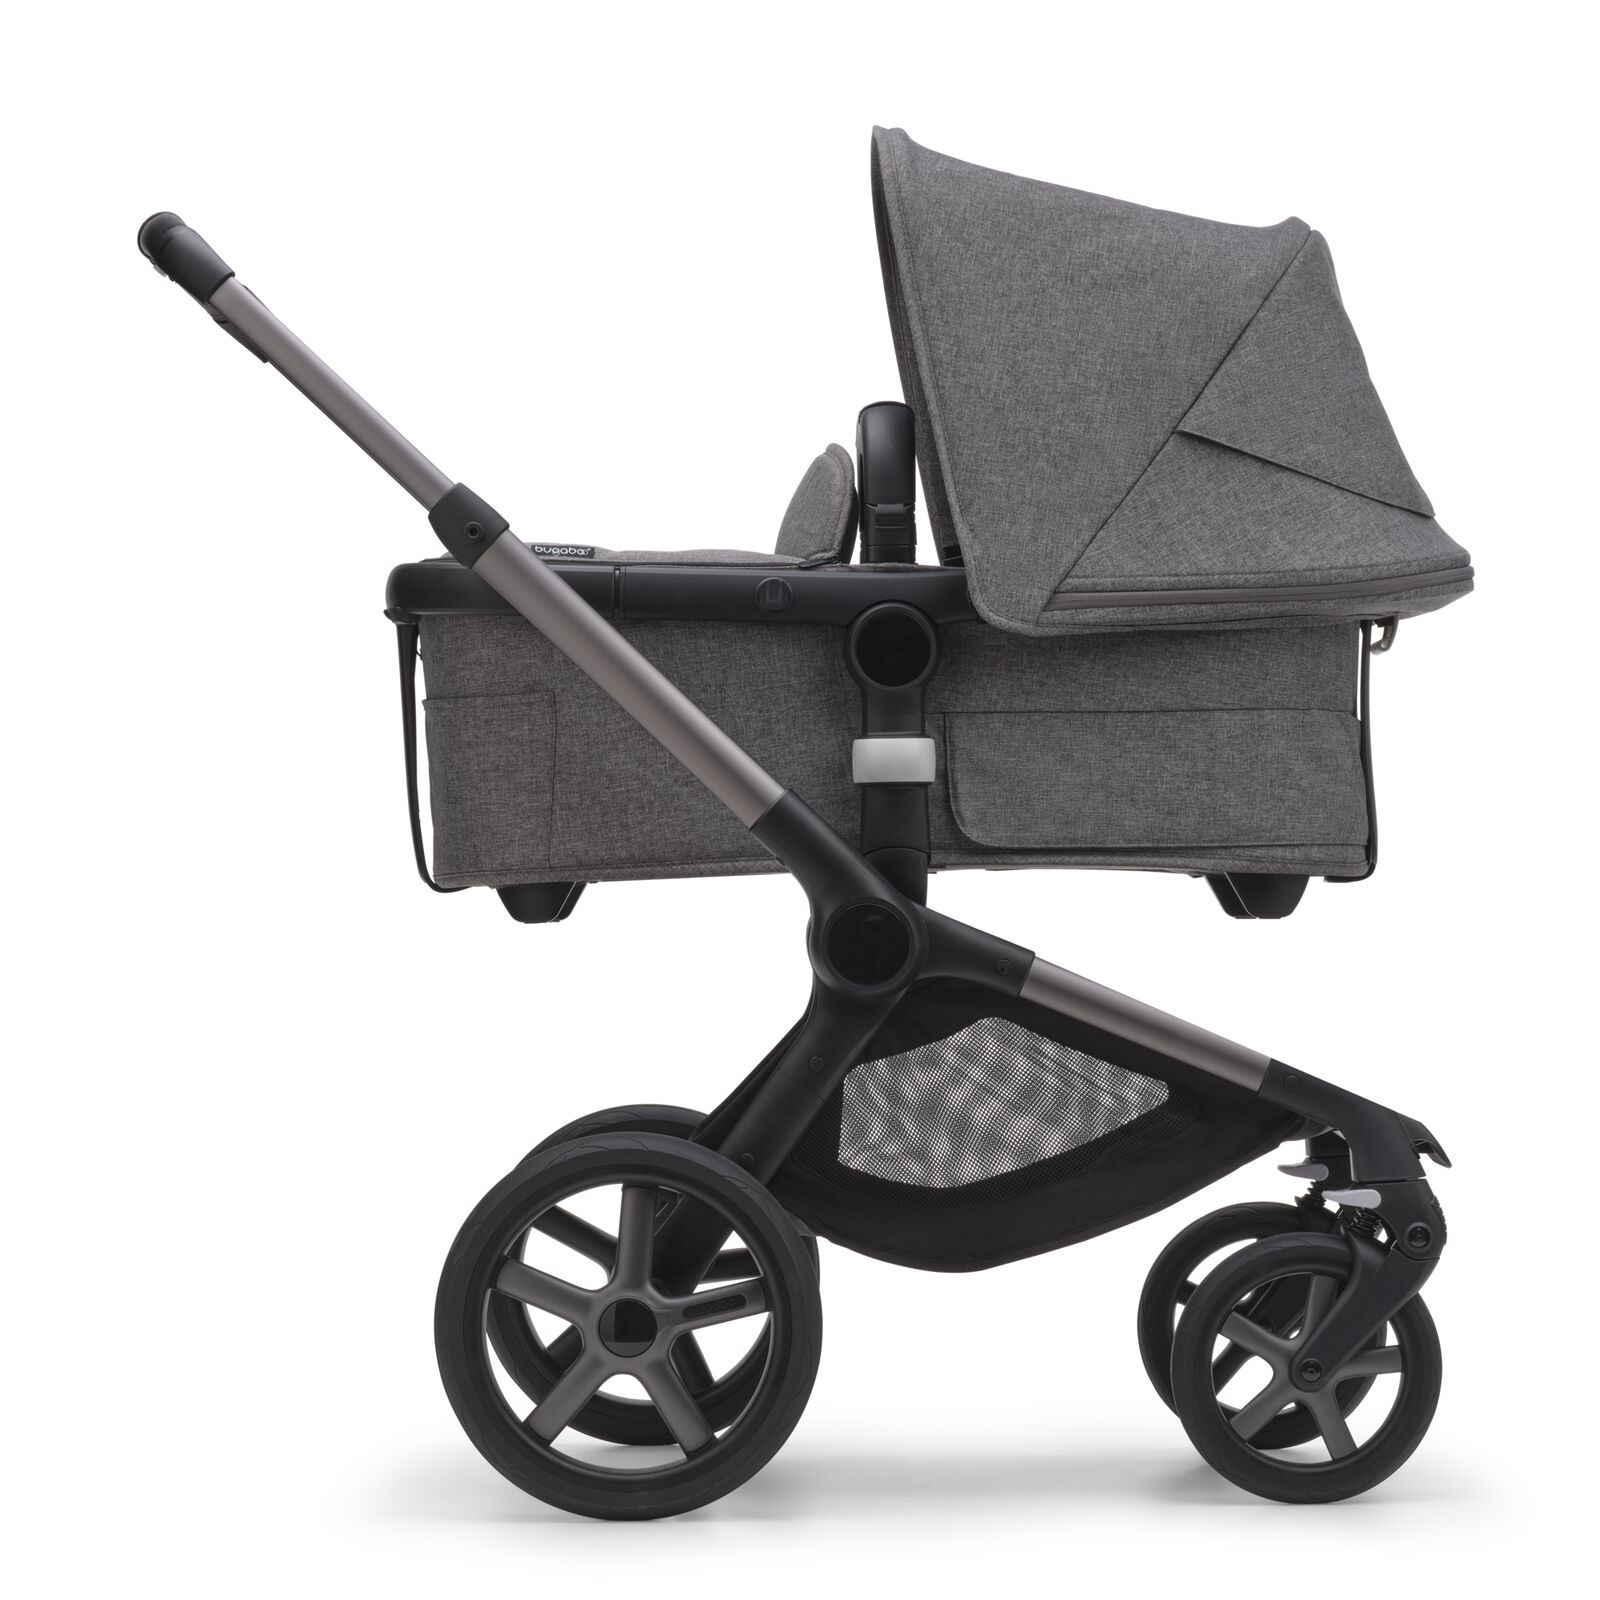 Side view of the Bugaboo Fox 5 bassinet stroller with graphite chassis, grey melange fabrics and grey melange sun canopy.